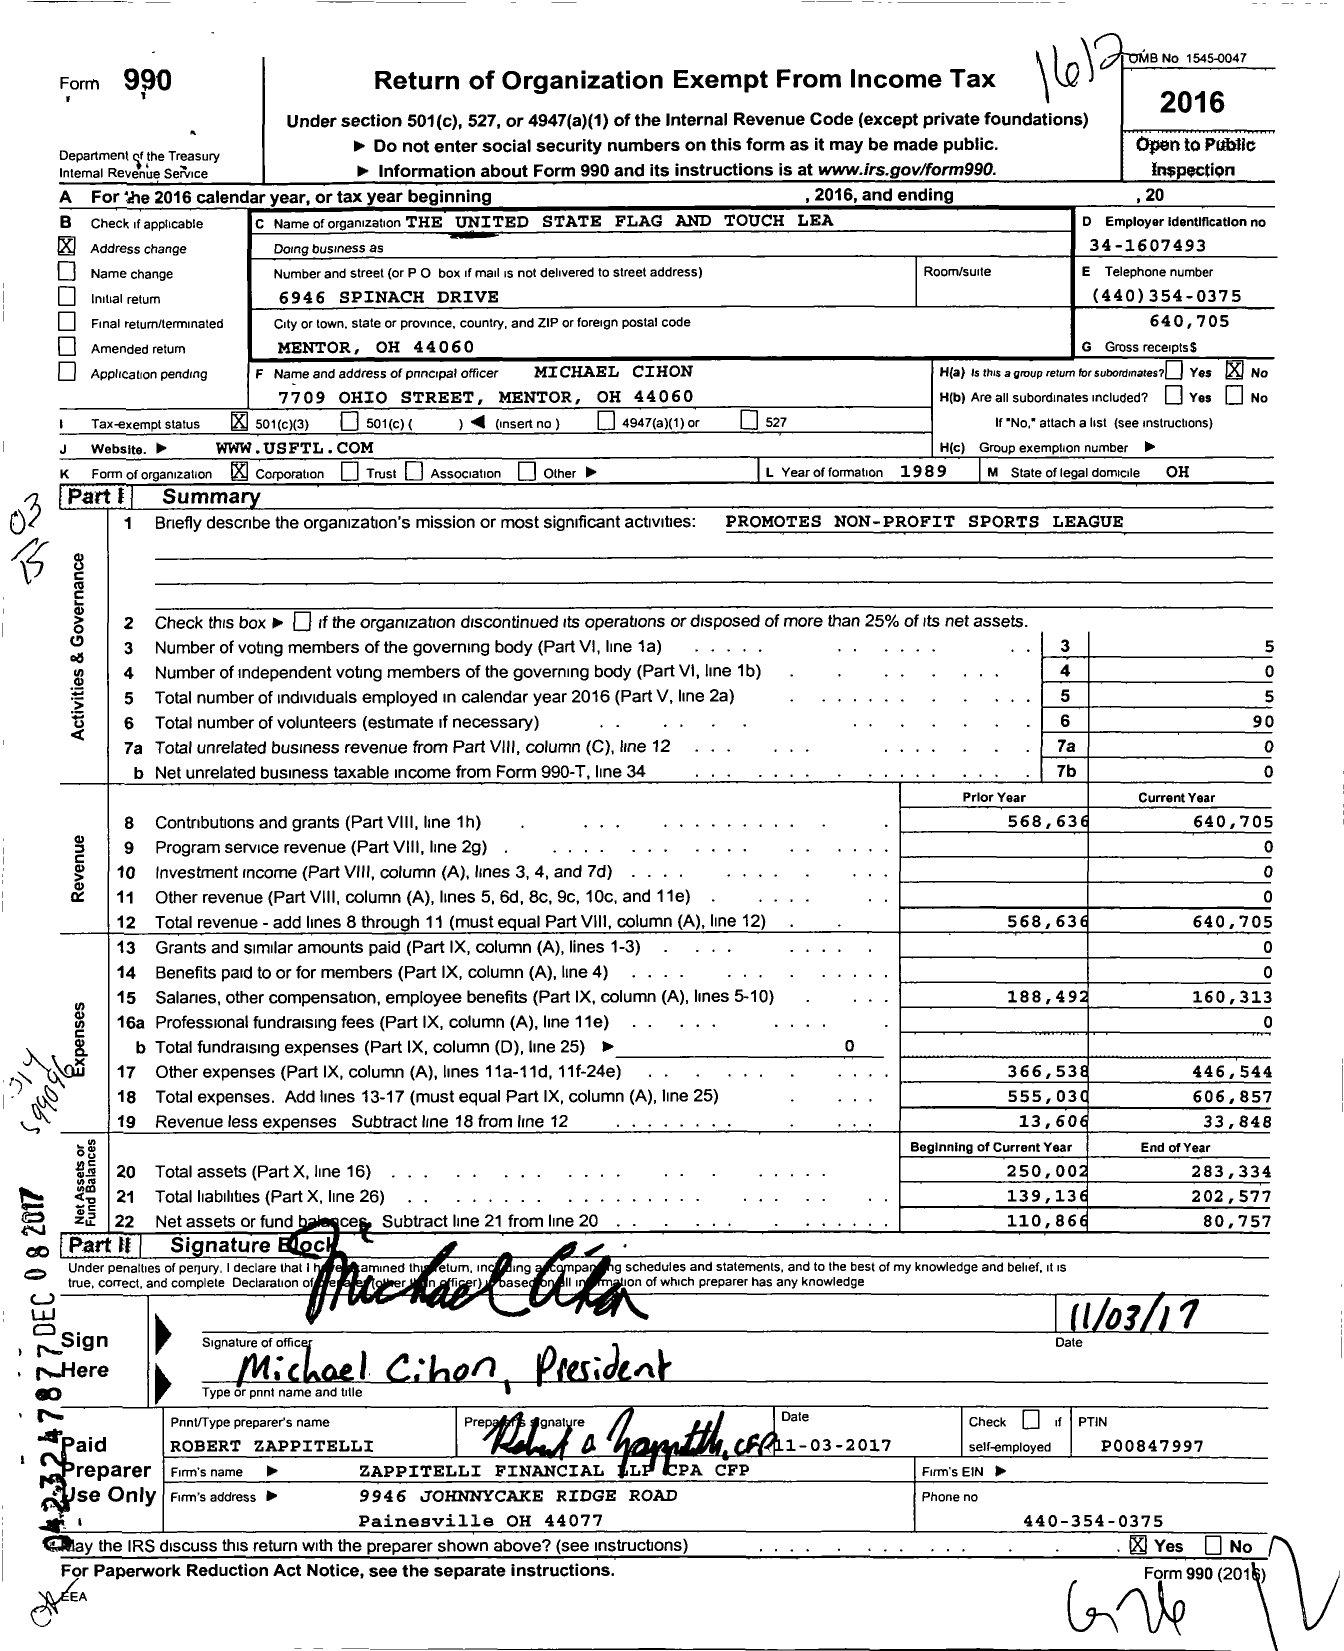 Image of first page of 2016 Form 990 for United State Flag and Touch Lea